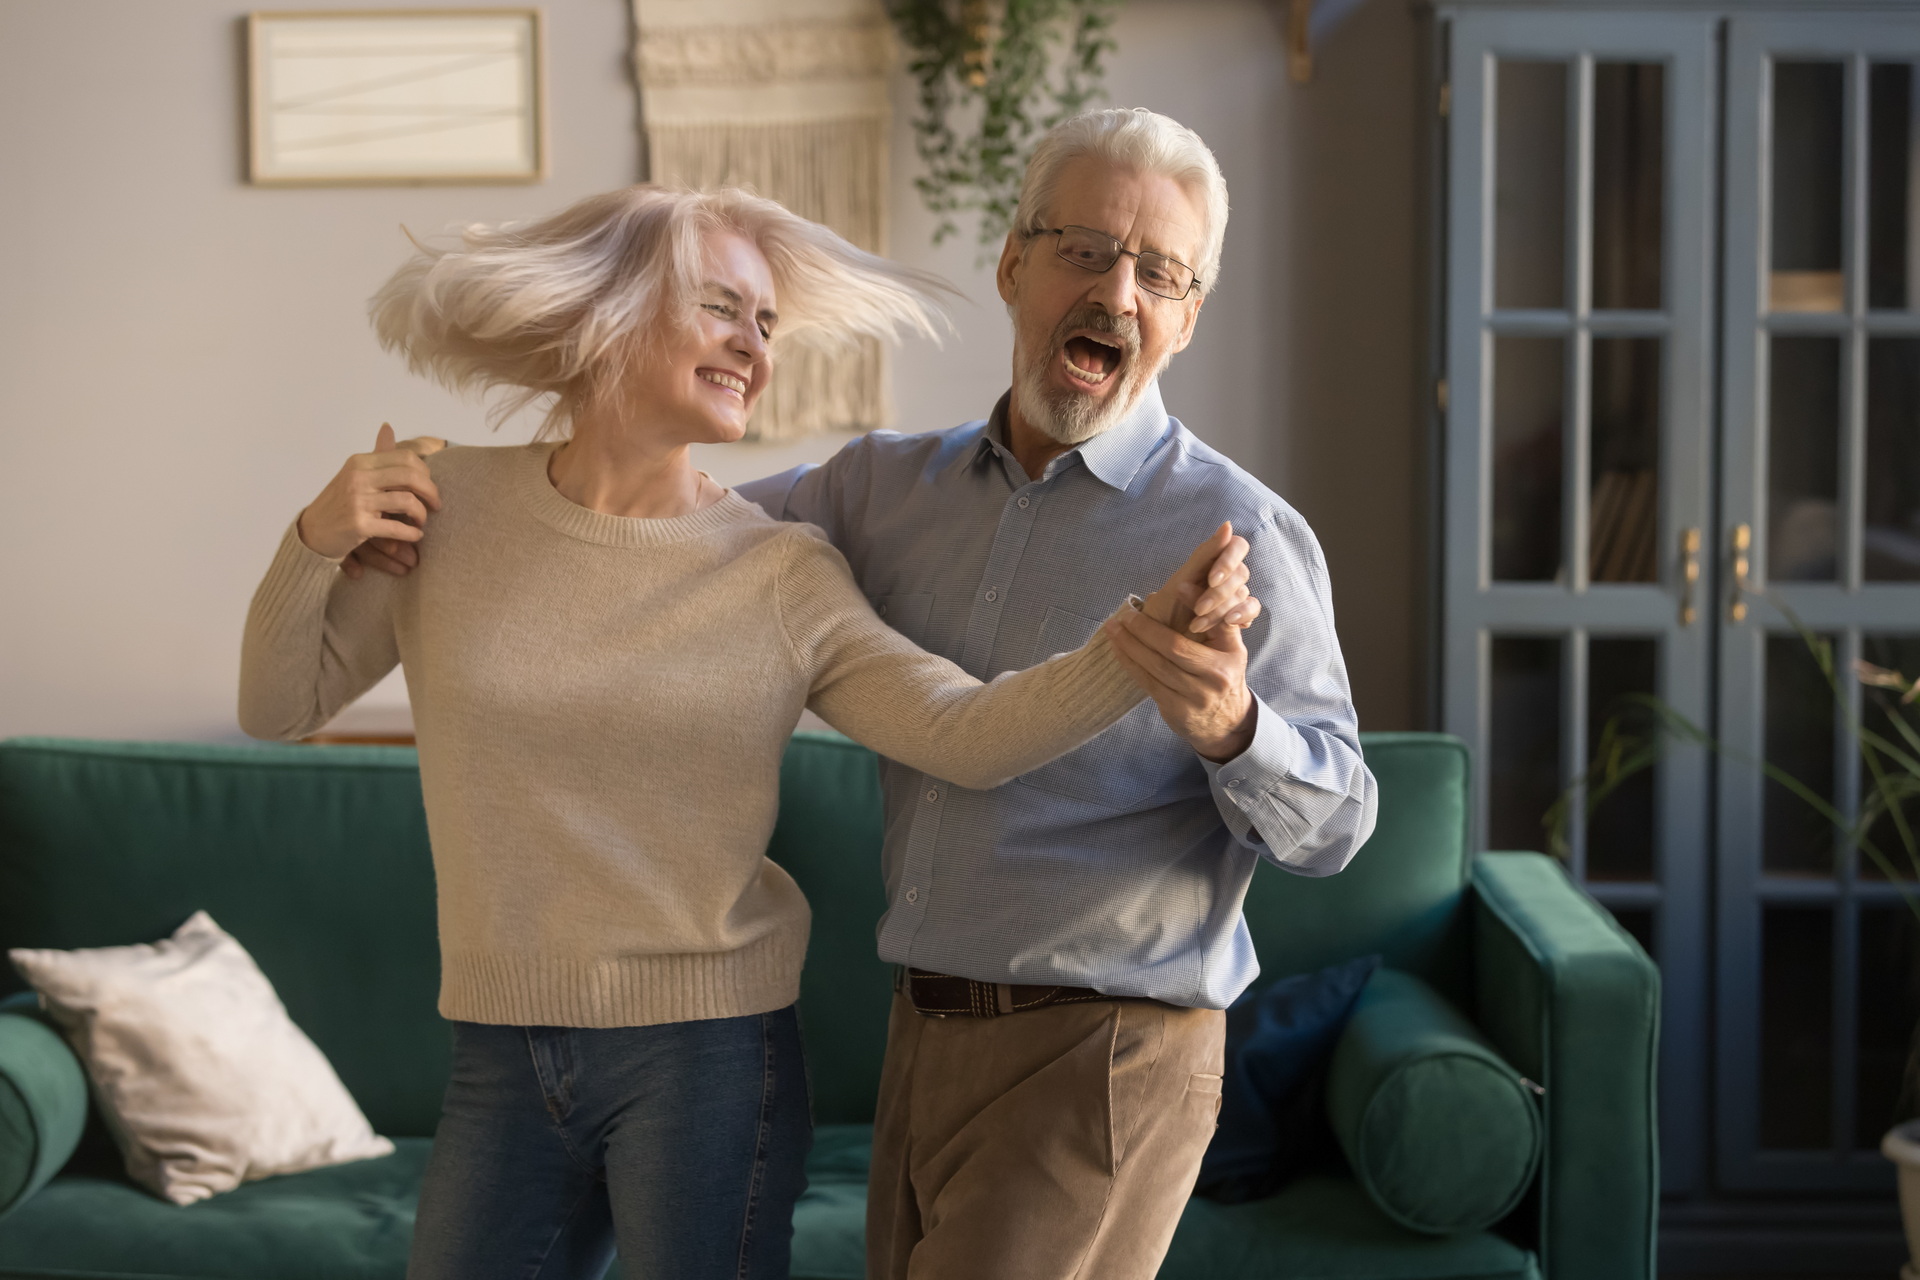 Carefree happy active old senior couple dancing jumping laughing in living room, cheerful retired elder husband holding hand of mature middle aged wife enjoy fun leisure retirement lifestyle at home